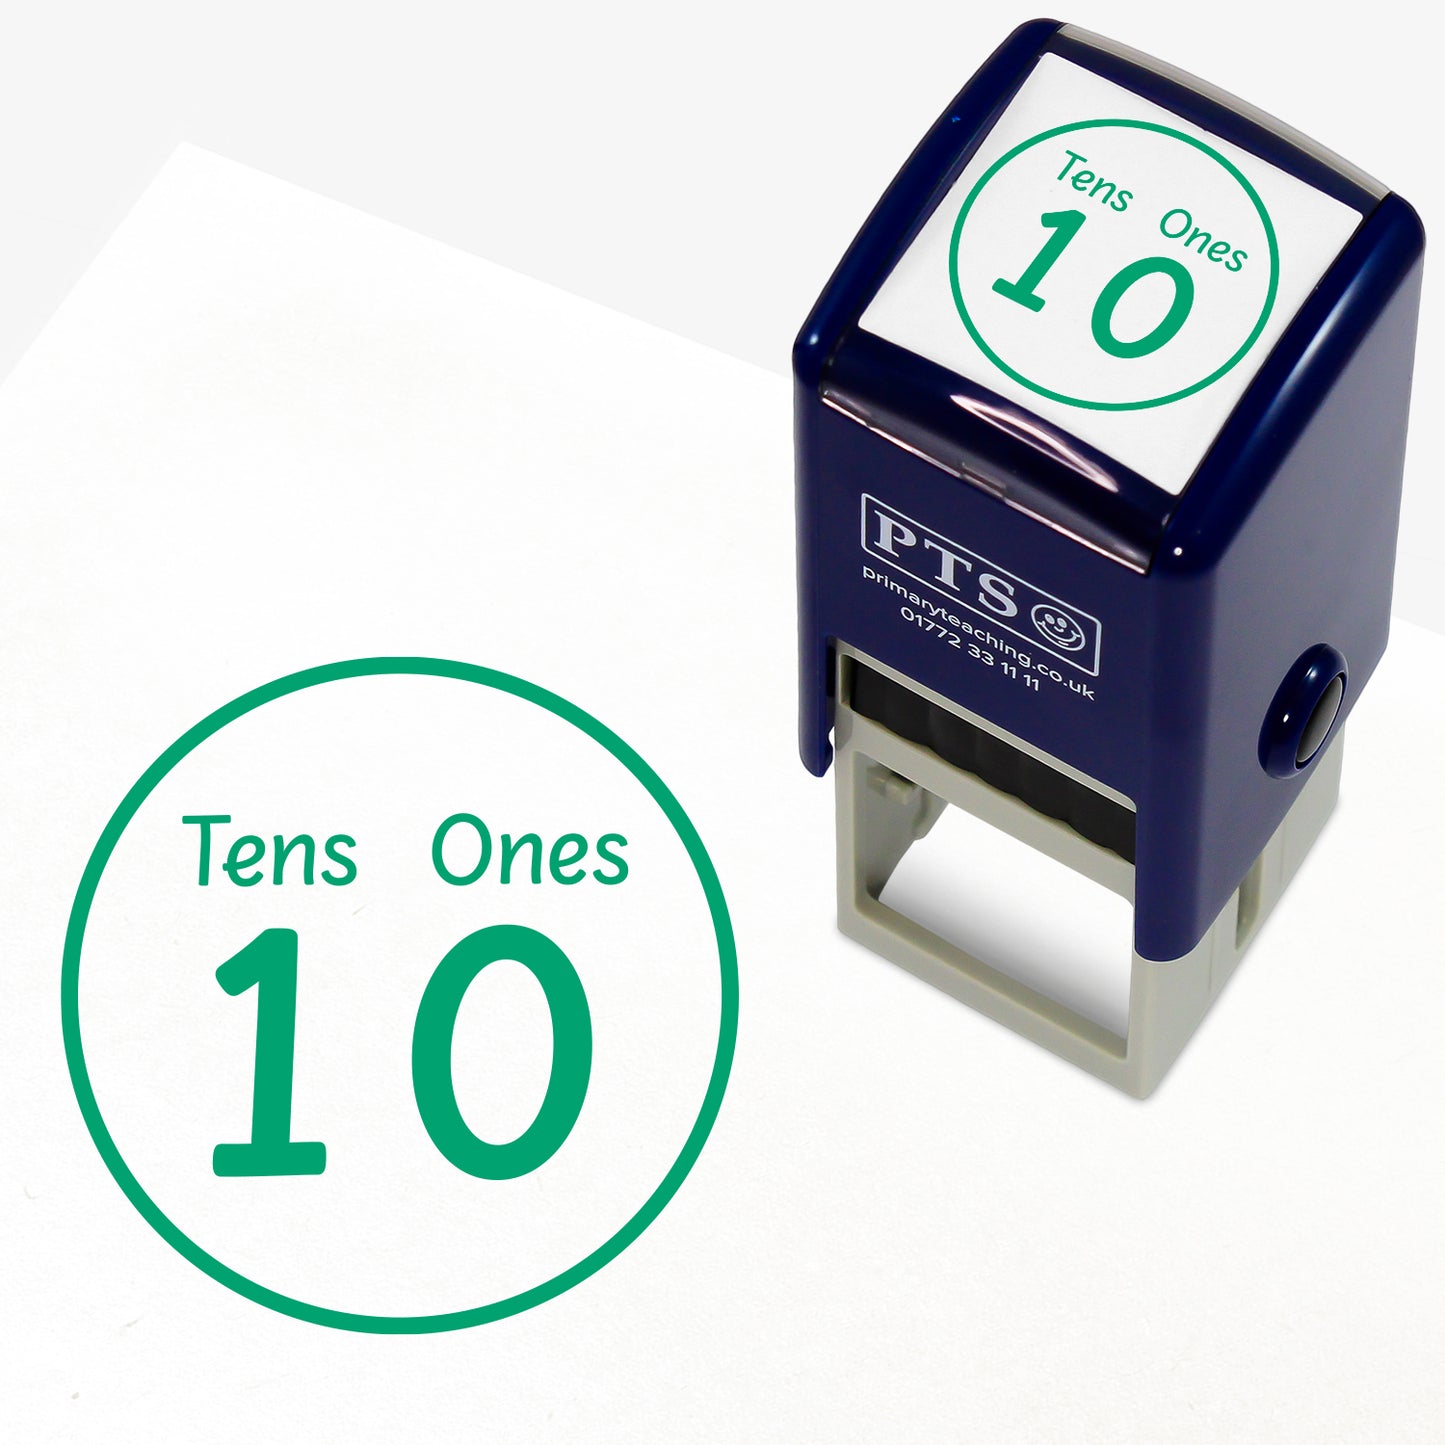 Tens and Ones Stamper - 25mm